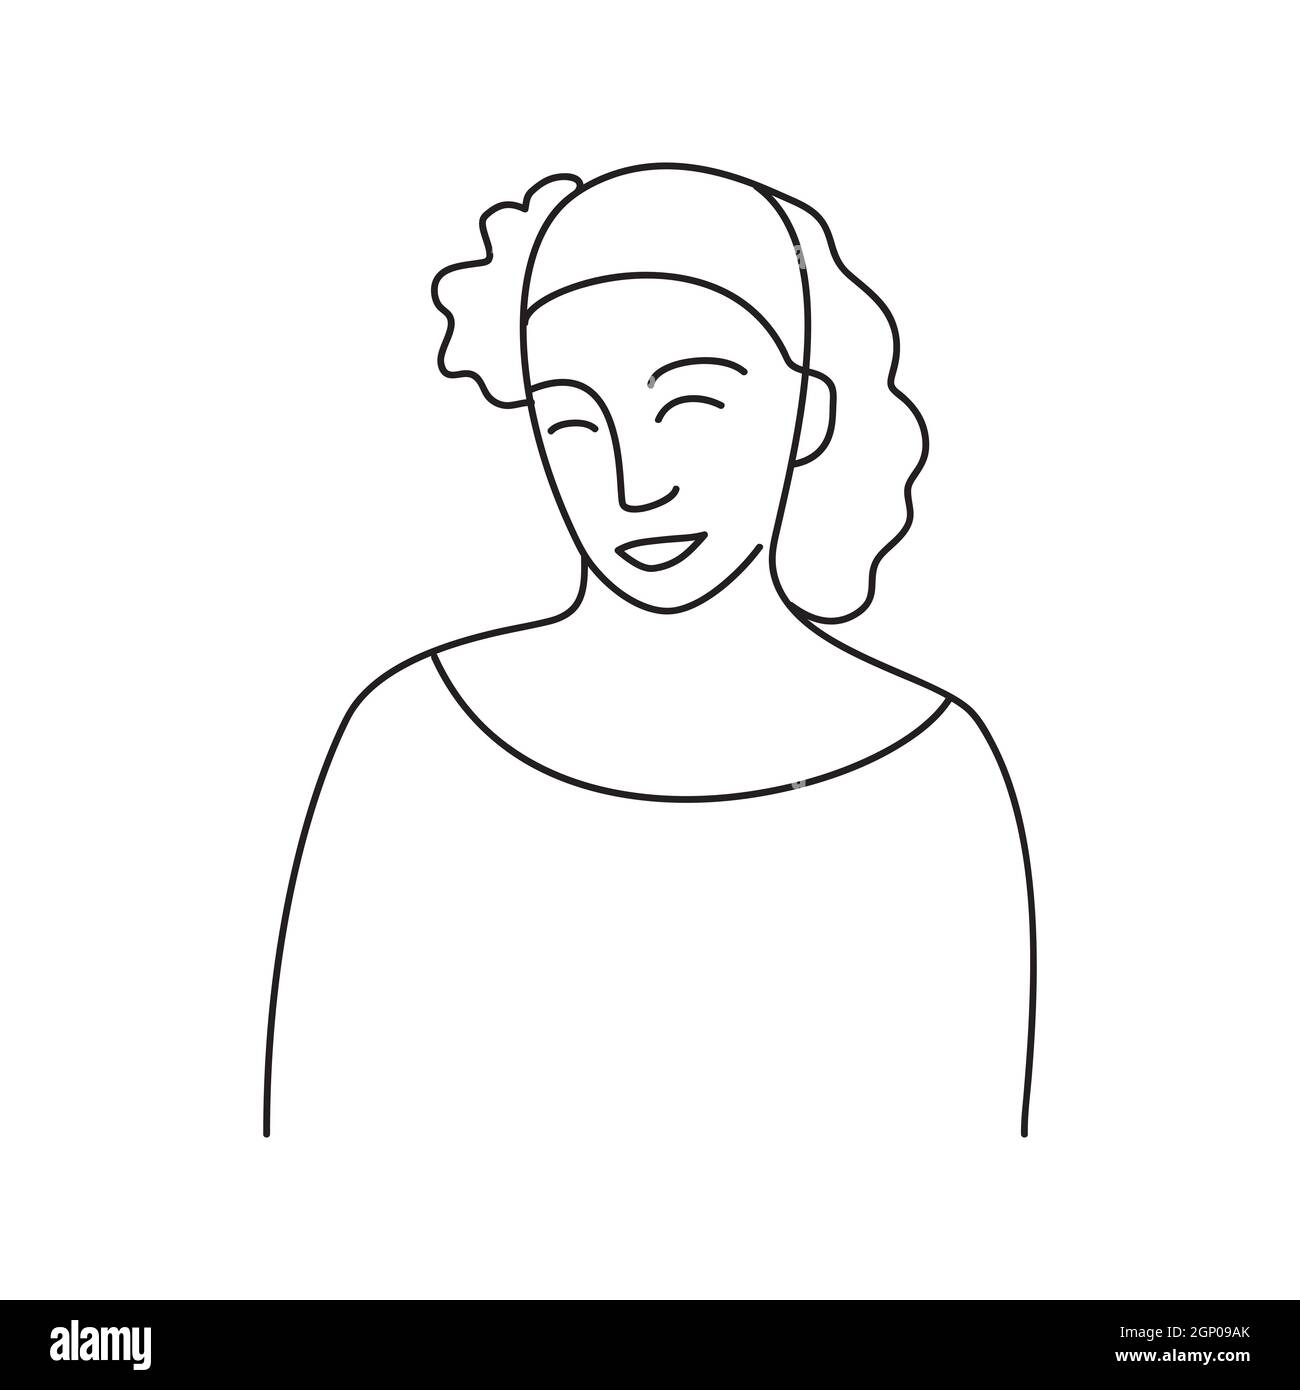 Minimalism hand drawn female vector portrait in modern abstract one line drawing graphic style. Decor print, wall art, creative design for social media. Trendy template with portrait woman front face Stock Vector